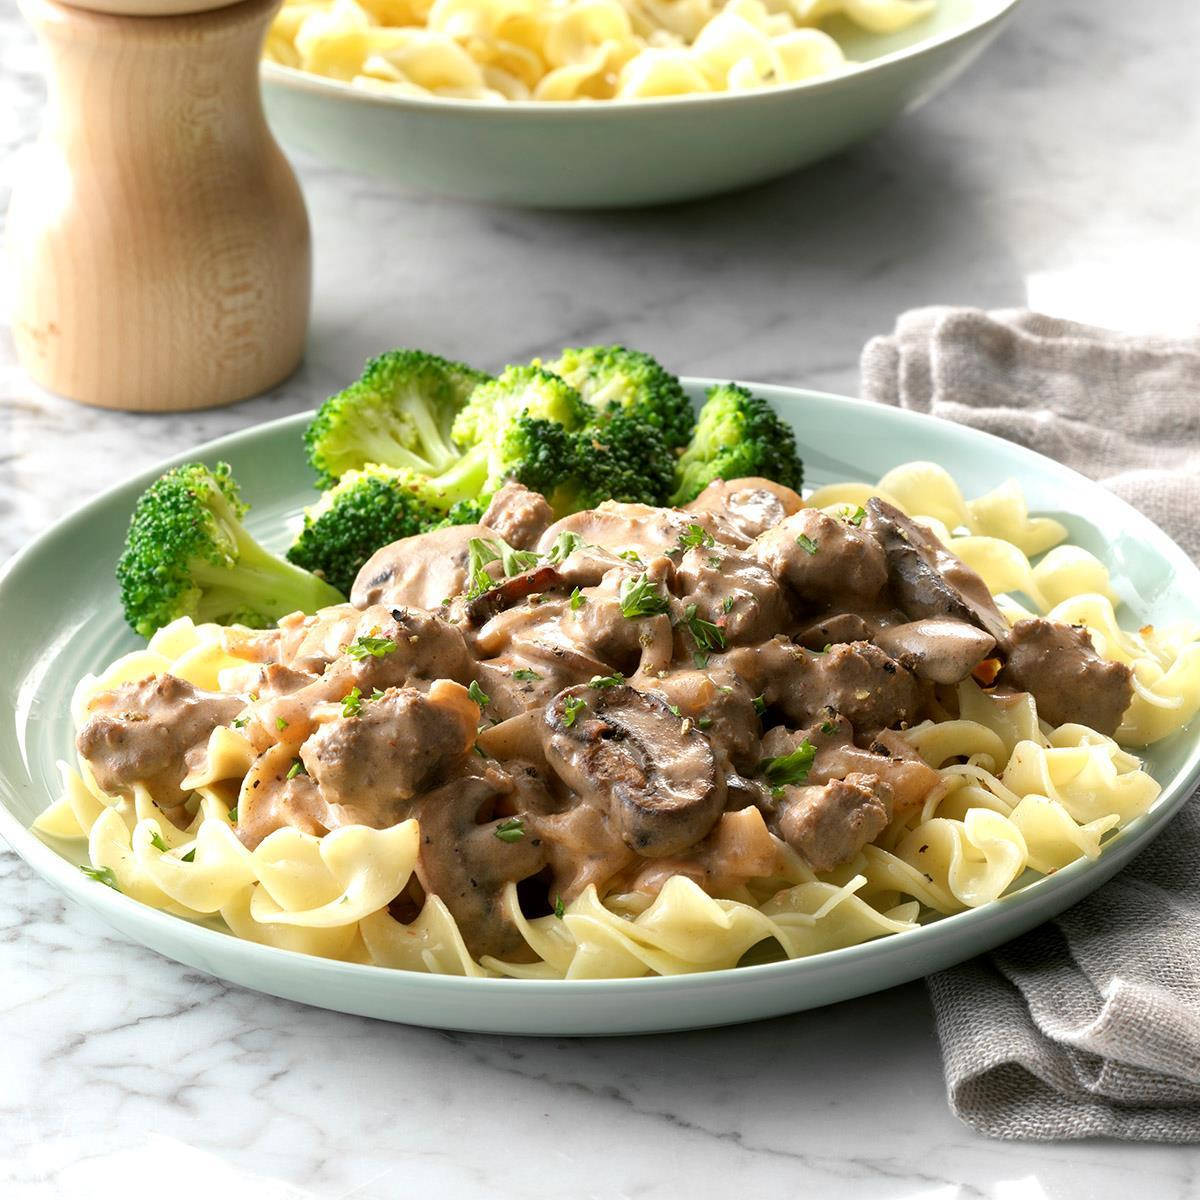 Delicious Beef Stroganoff Served Over Pasta With a Side of Broccoli Wallpaper